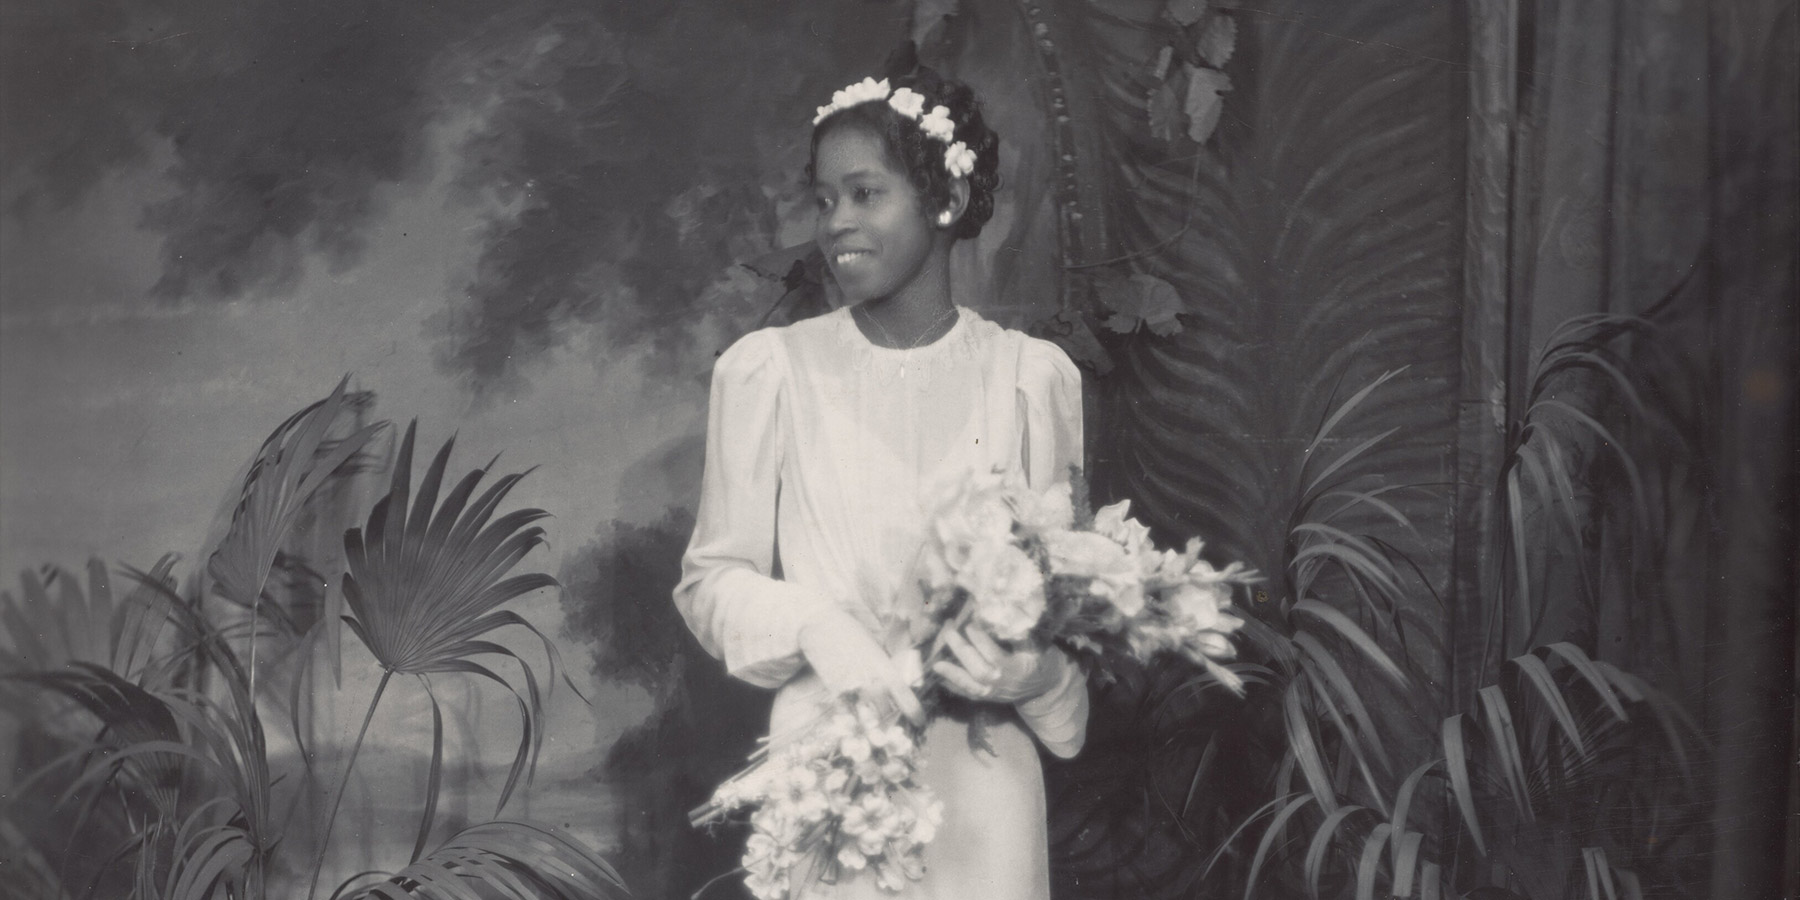 A woman in white wedding dress wearing a white flower headband holding a bouquet of flowers with palm plants behind her